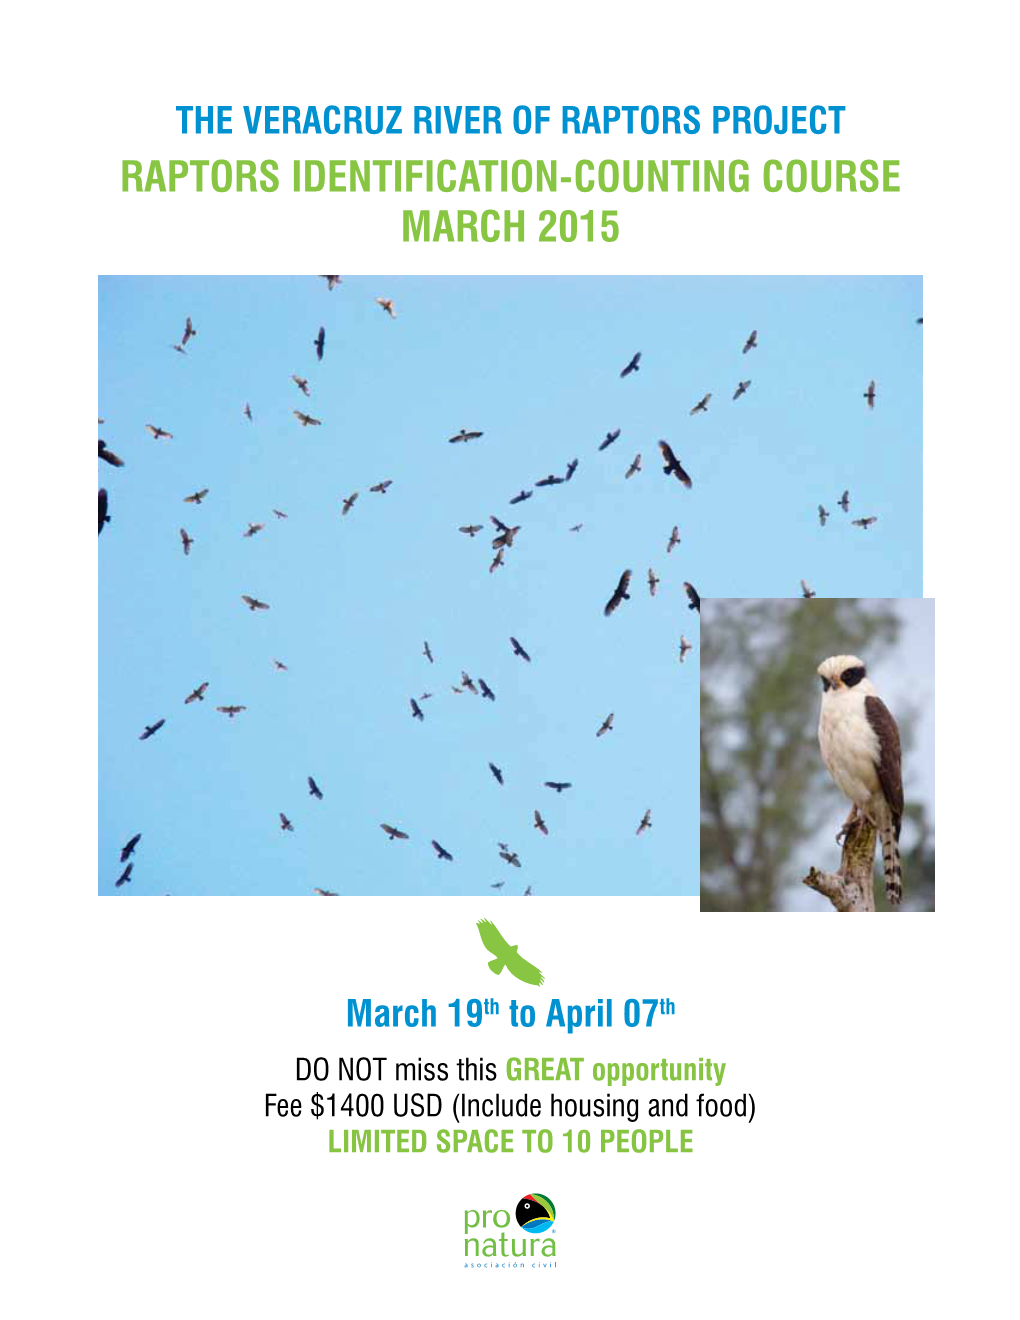 Raptors Identification-Counting Course March 2015